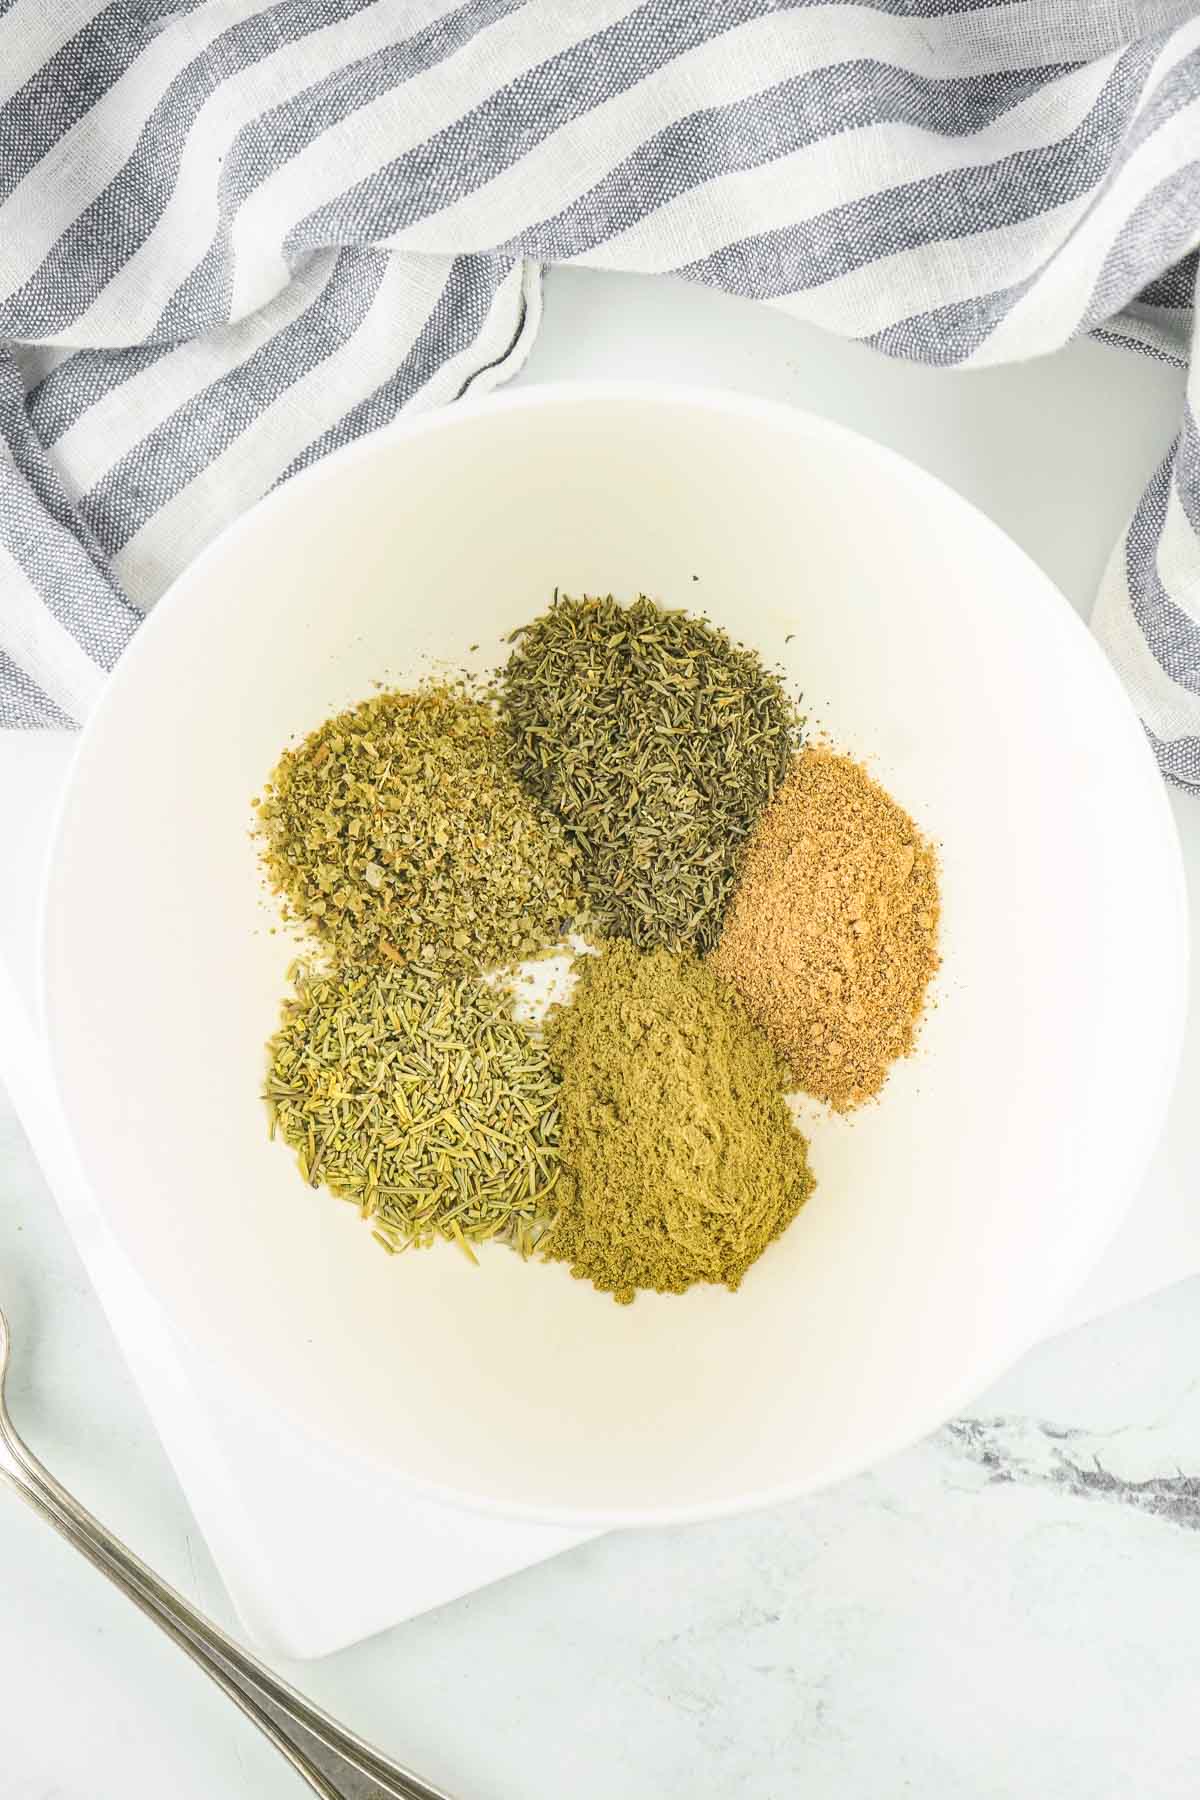 five spices for an easy homemade poultry seasoning recipe in piles in a white bowl.